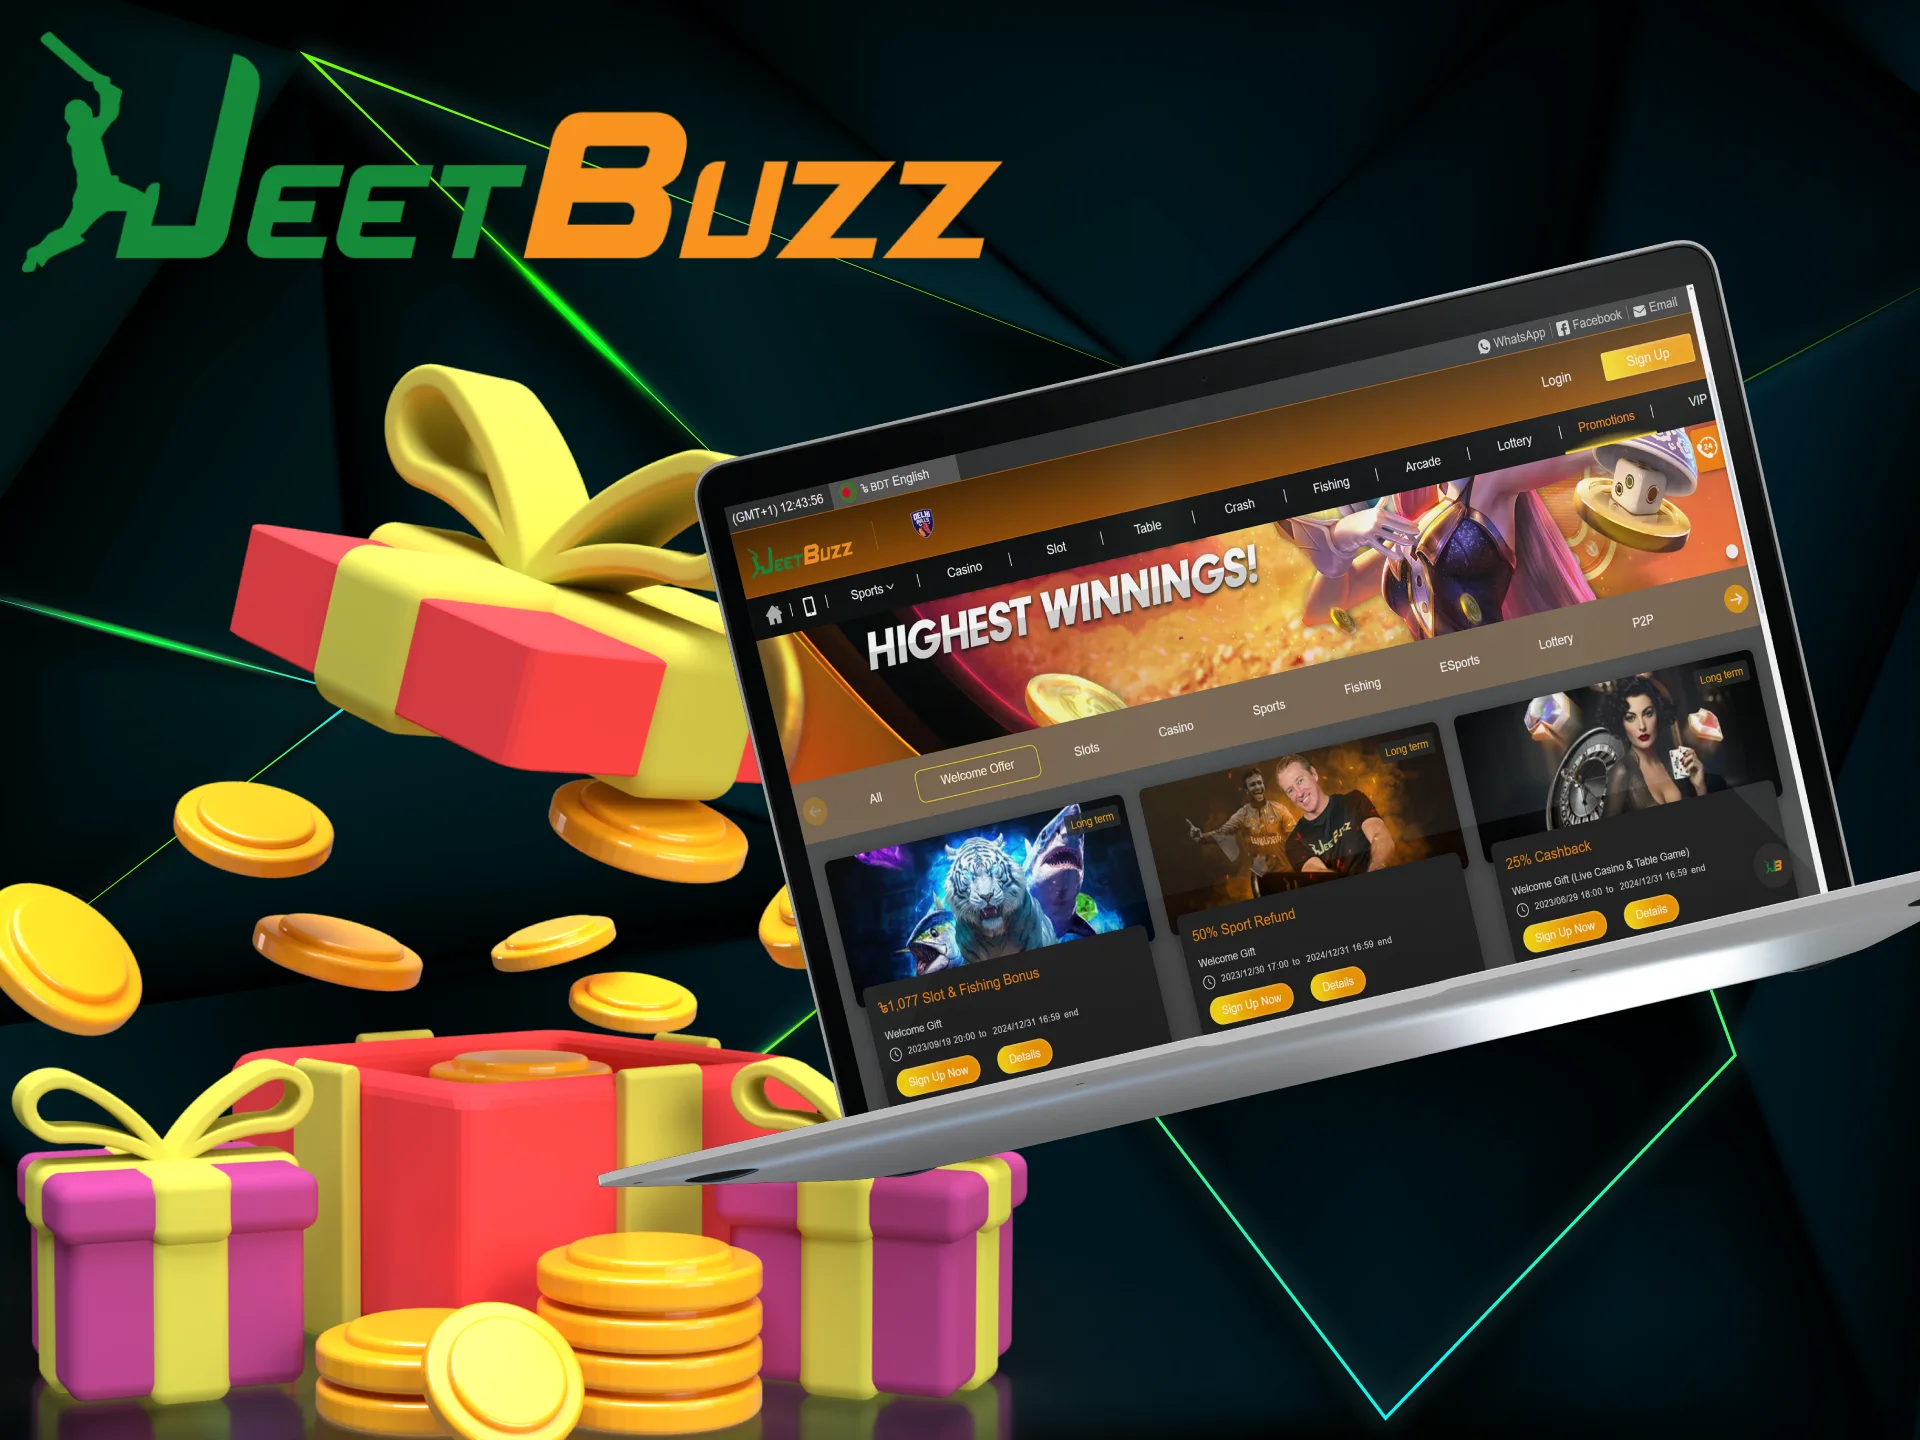 New users will receive a nice compliment from JeetBuzz for creating an account, it can be used in both casino and sports betting.